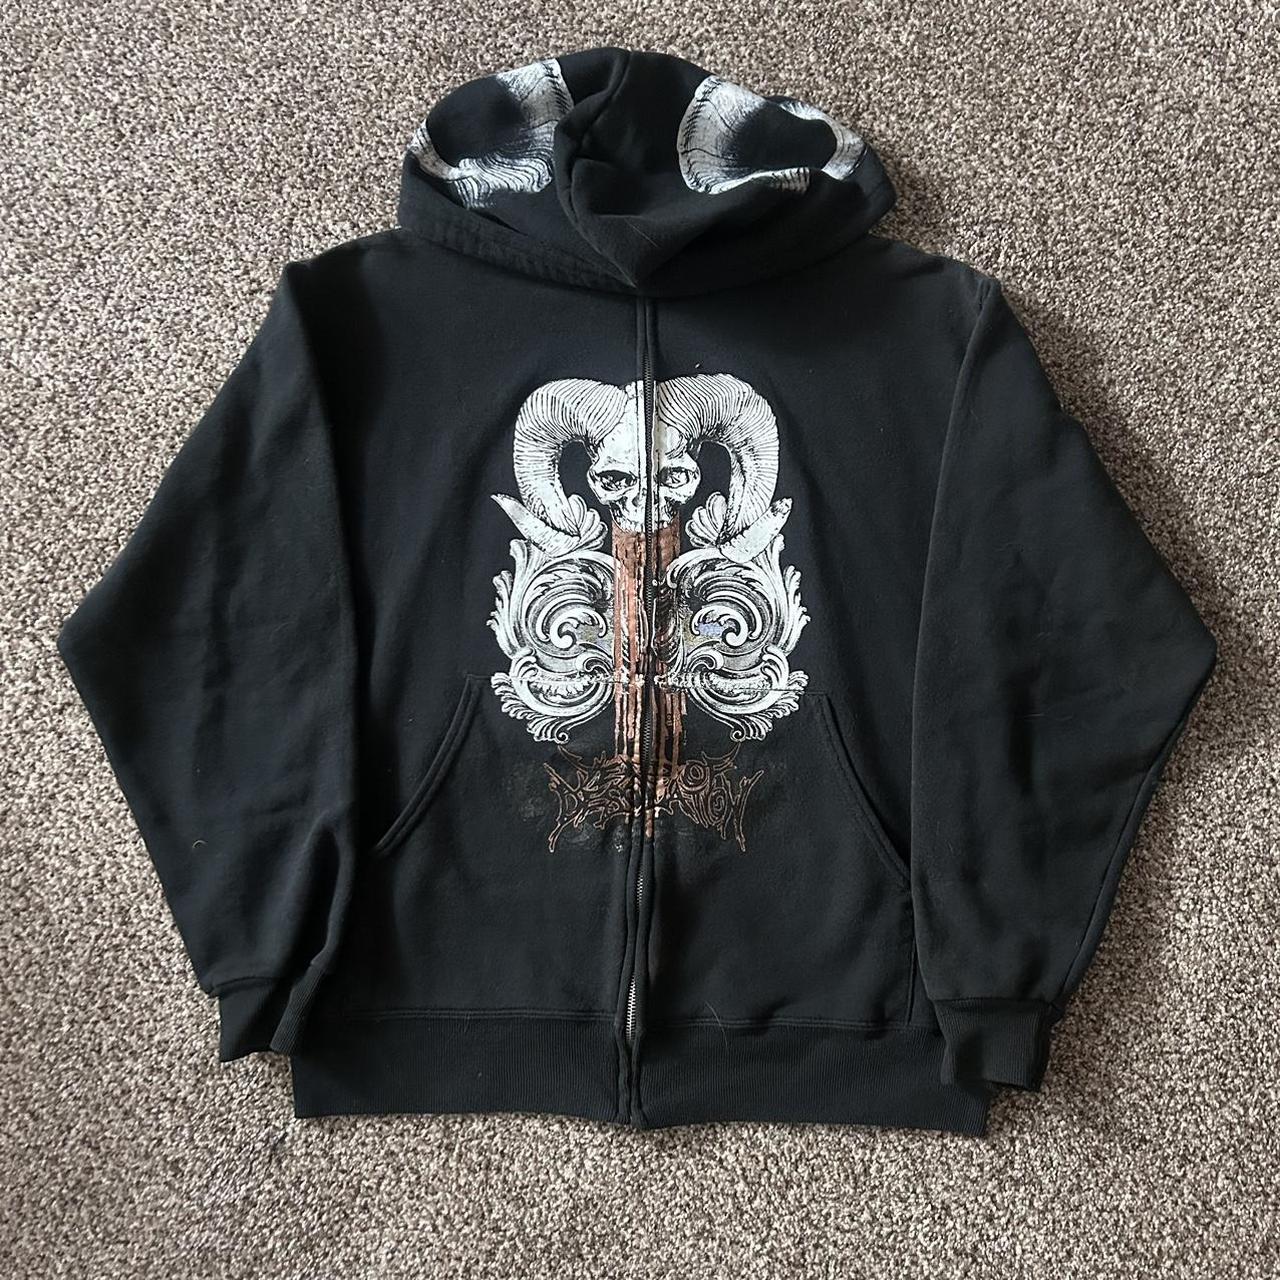 ️ Year of Desolation Hoodie ️ 🧡 FREE SHIPPING WITH... - Depop